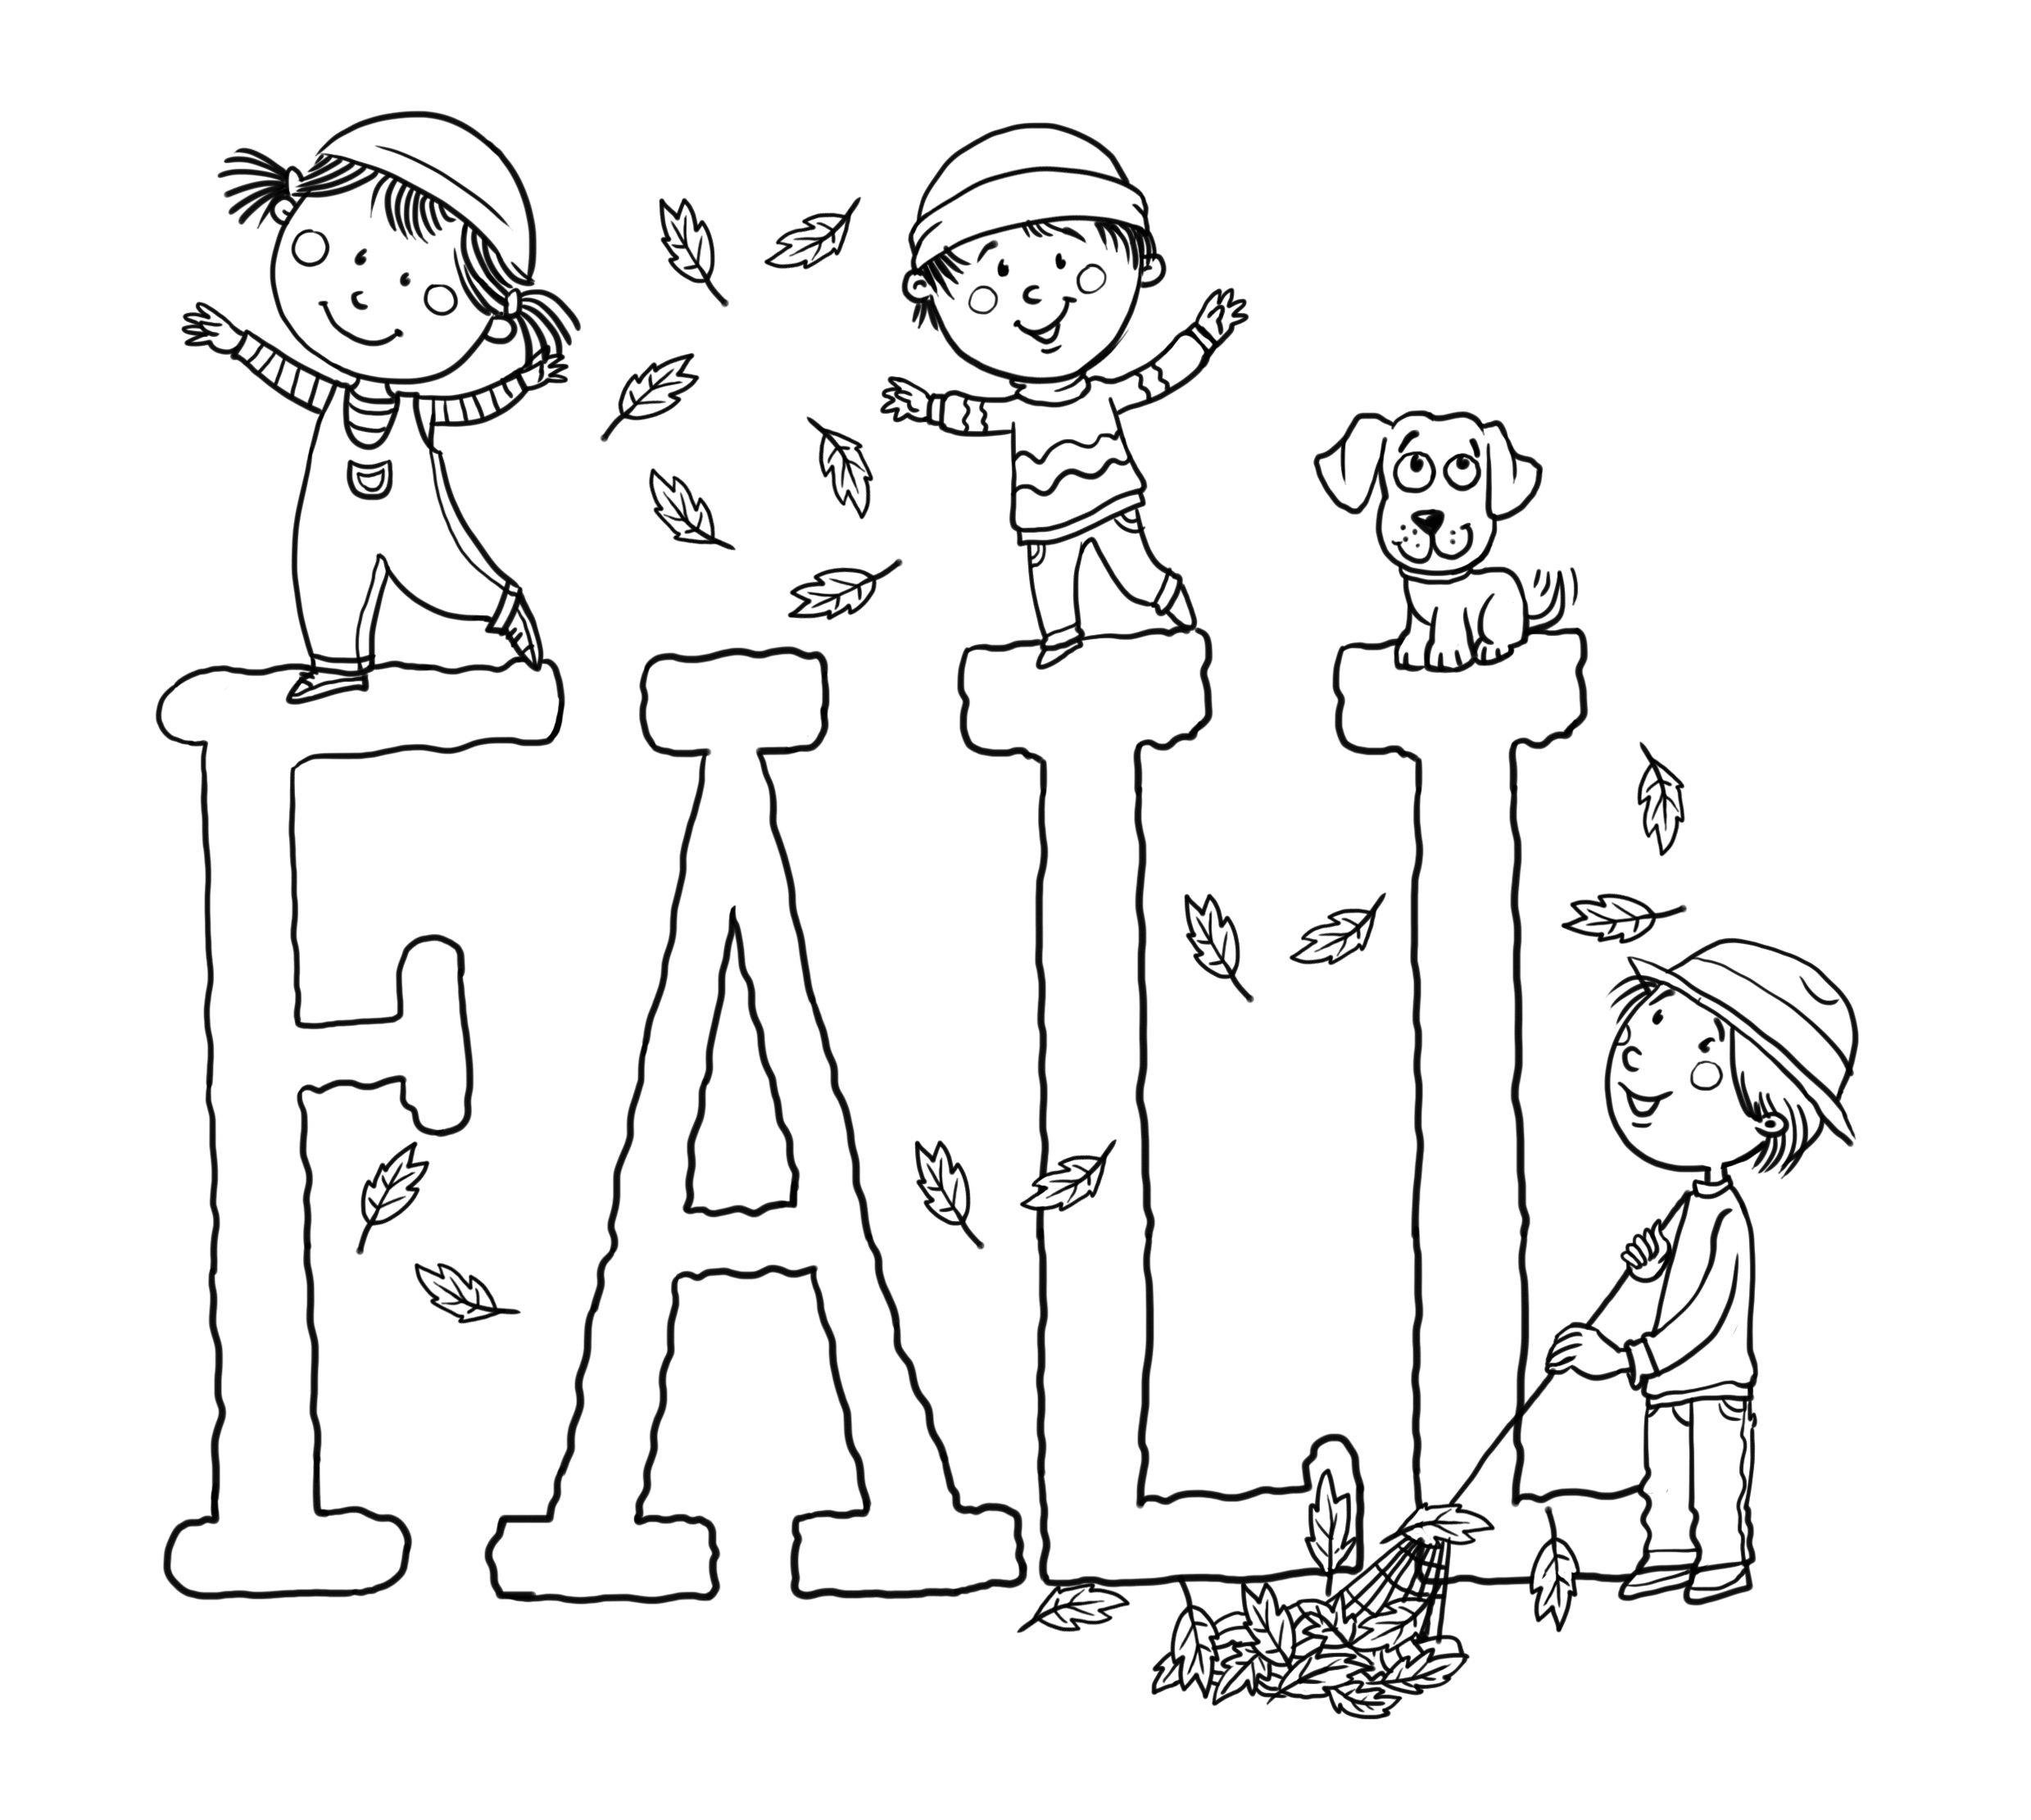 fall Coloring Page - Print fall pictures to color at AllKidsNetwork.com